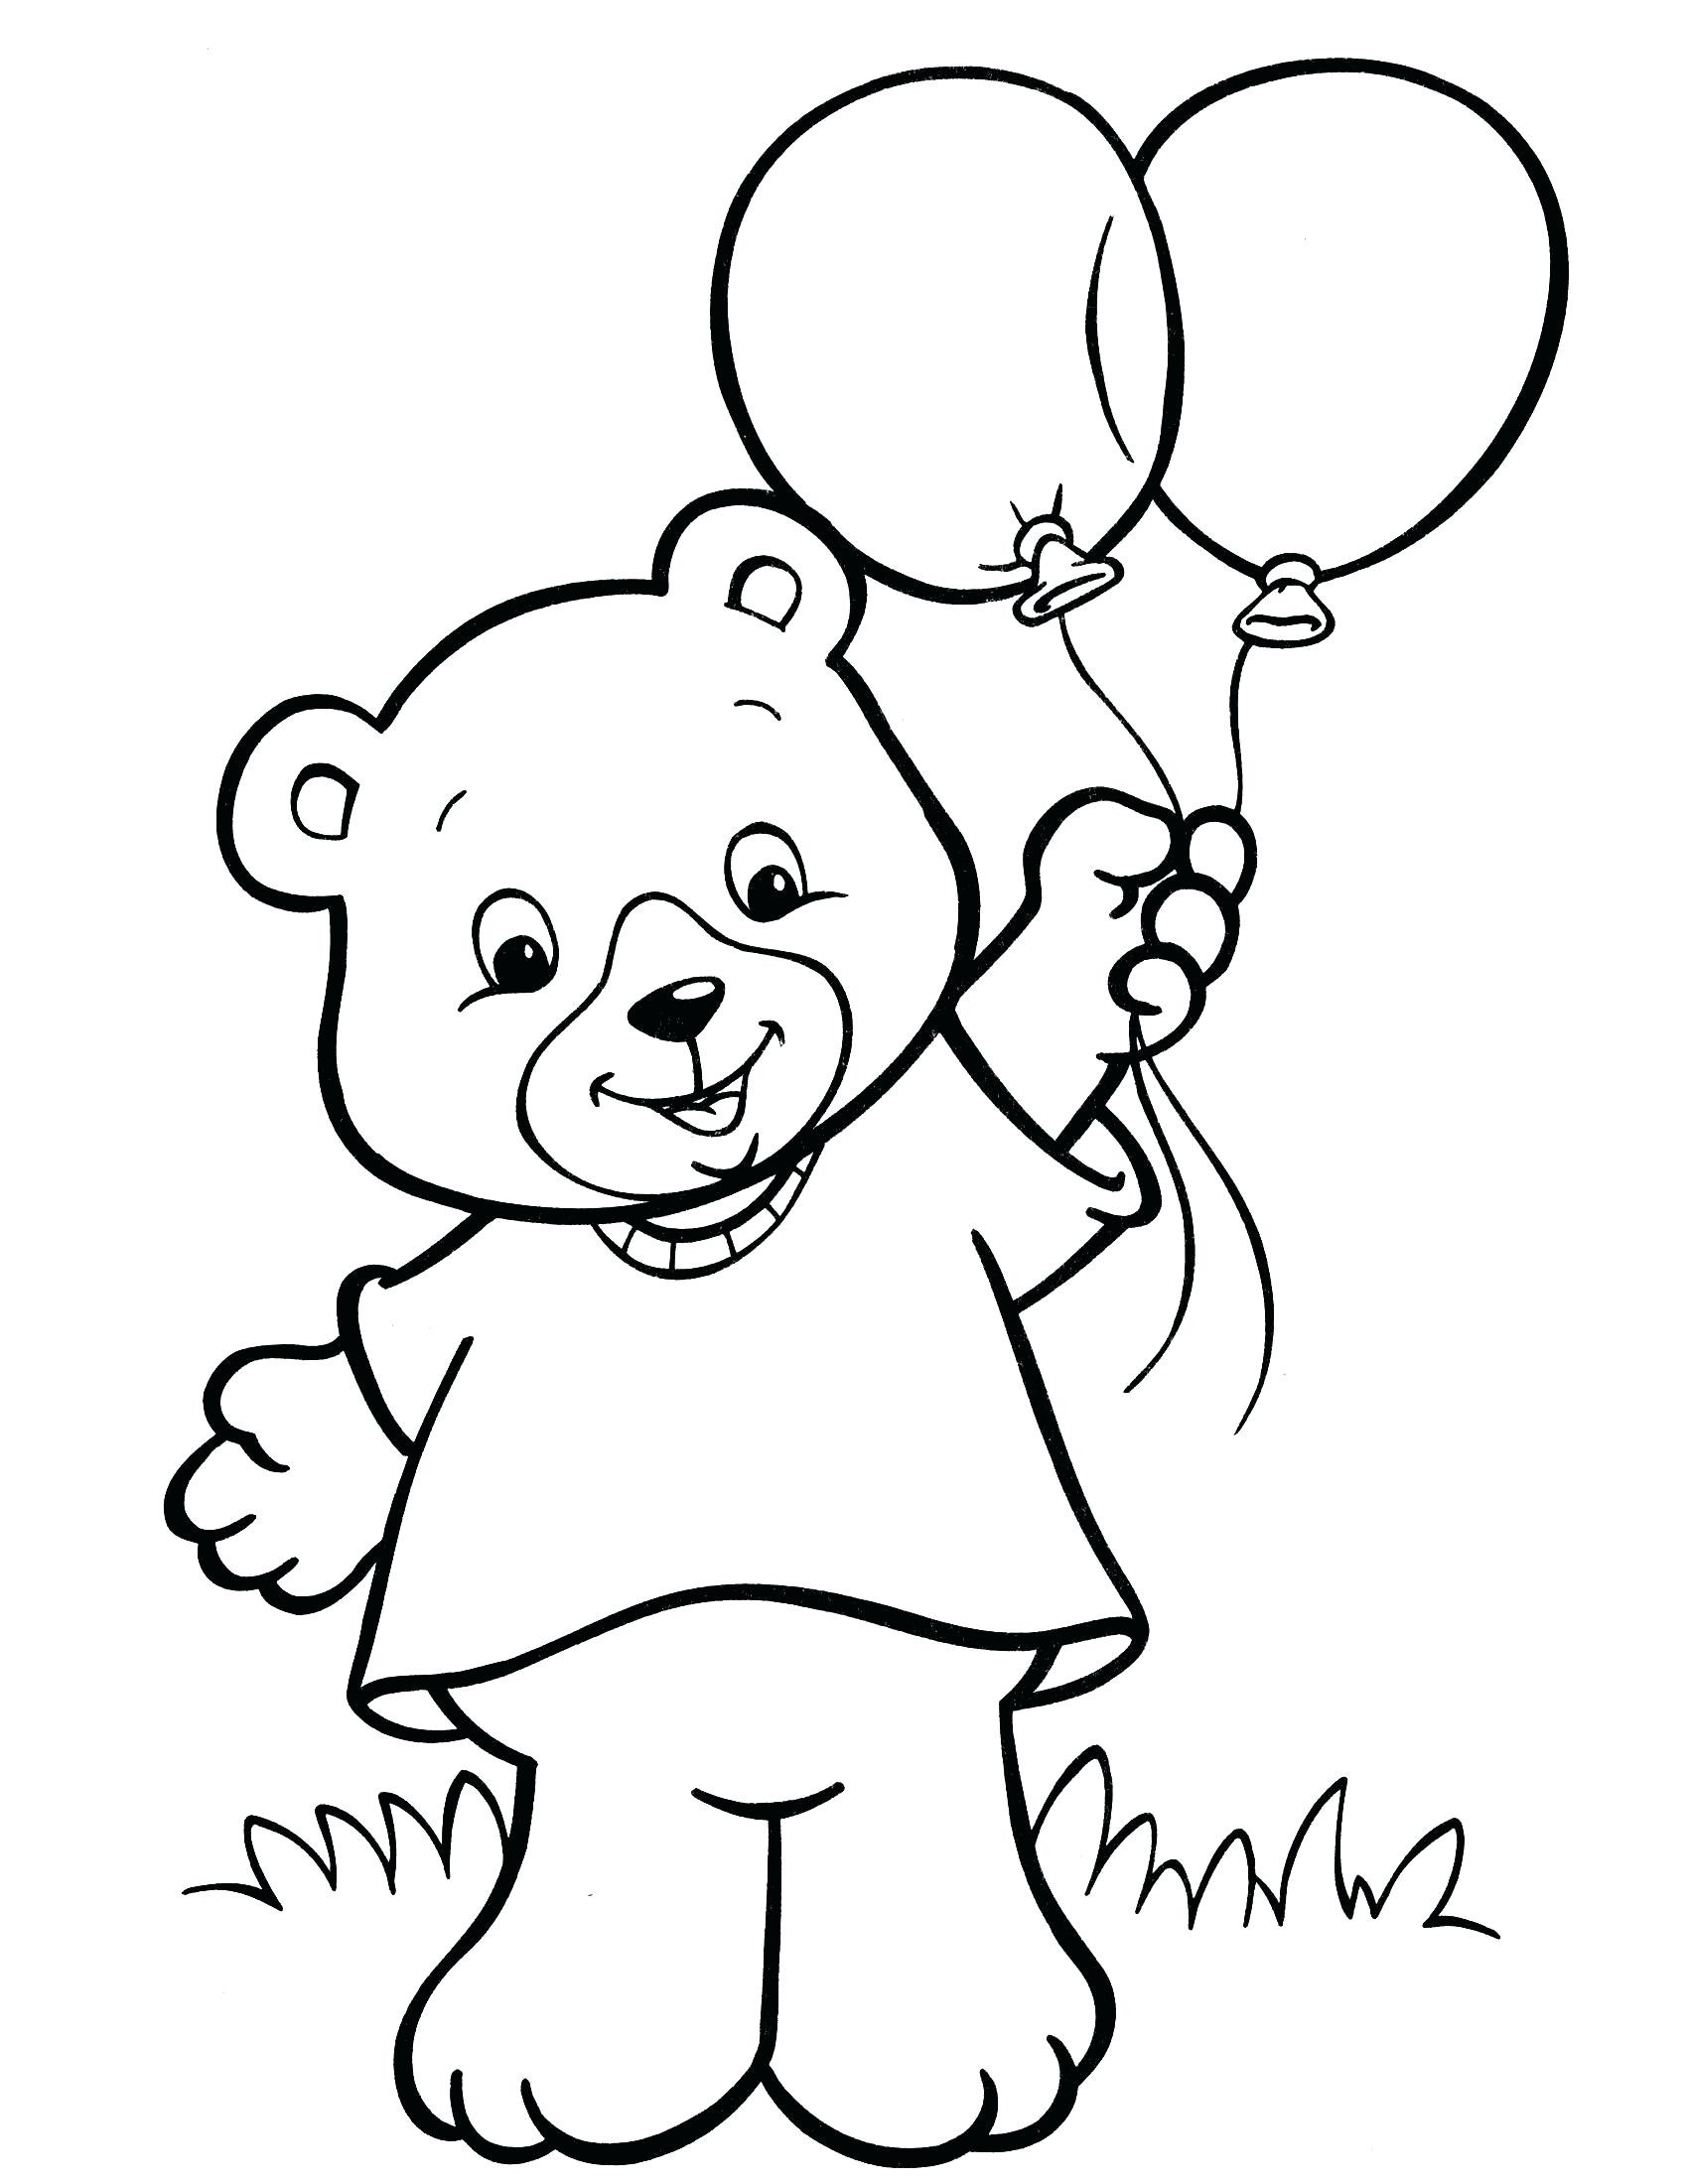 13 Year Old Coloring Pages at GetColorings.com | Free printable